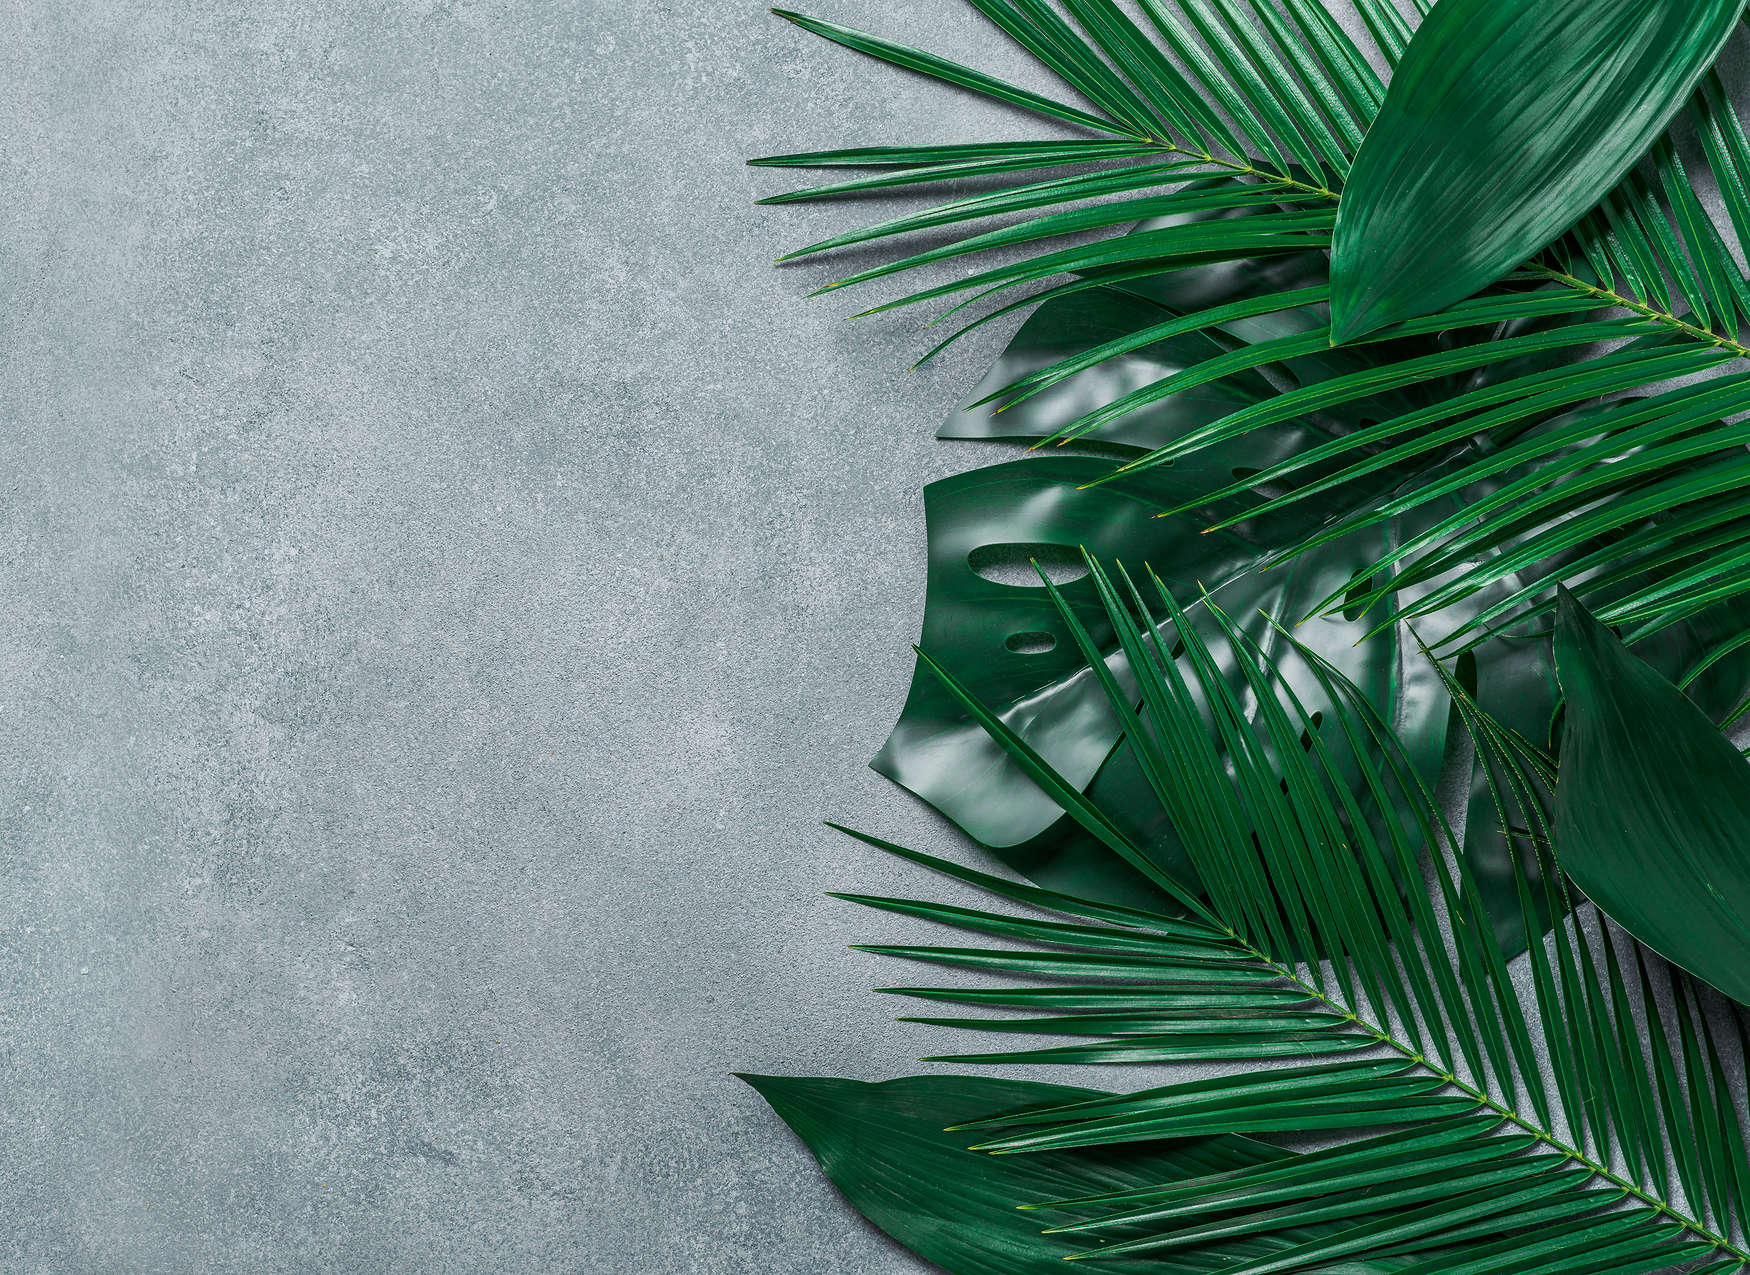             Photo wallpaper tropical leaves on concrete background - Green, Grey
        